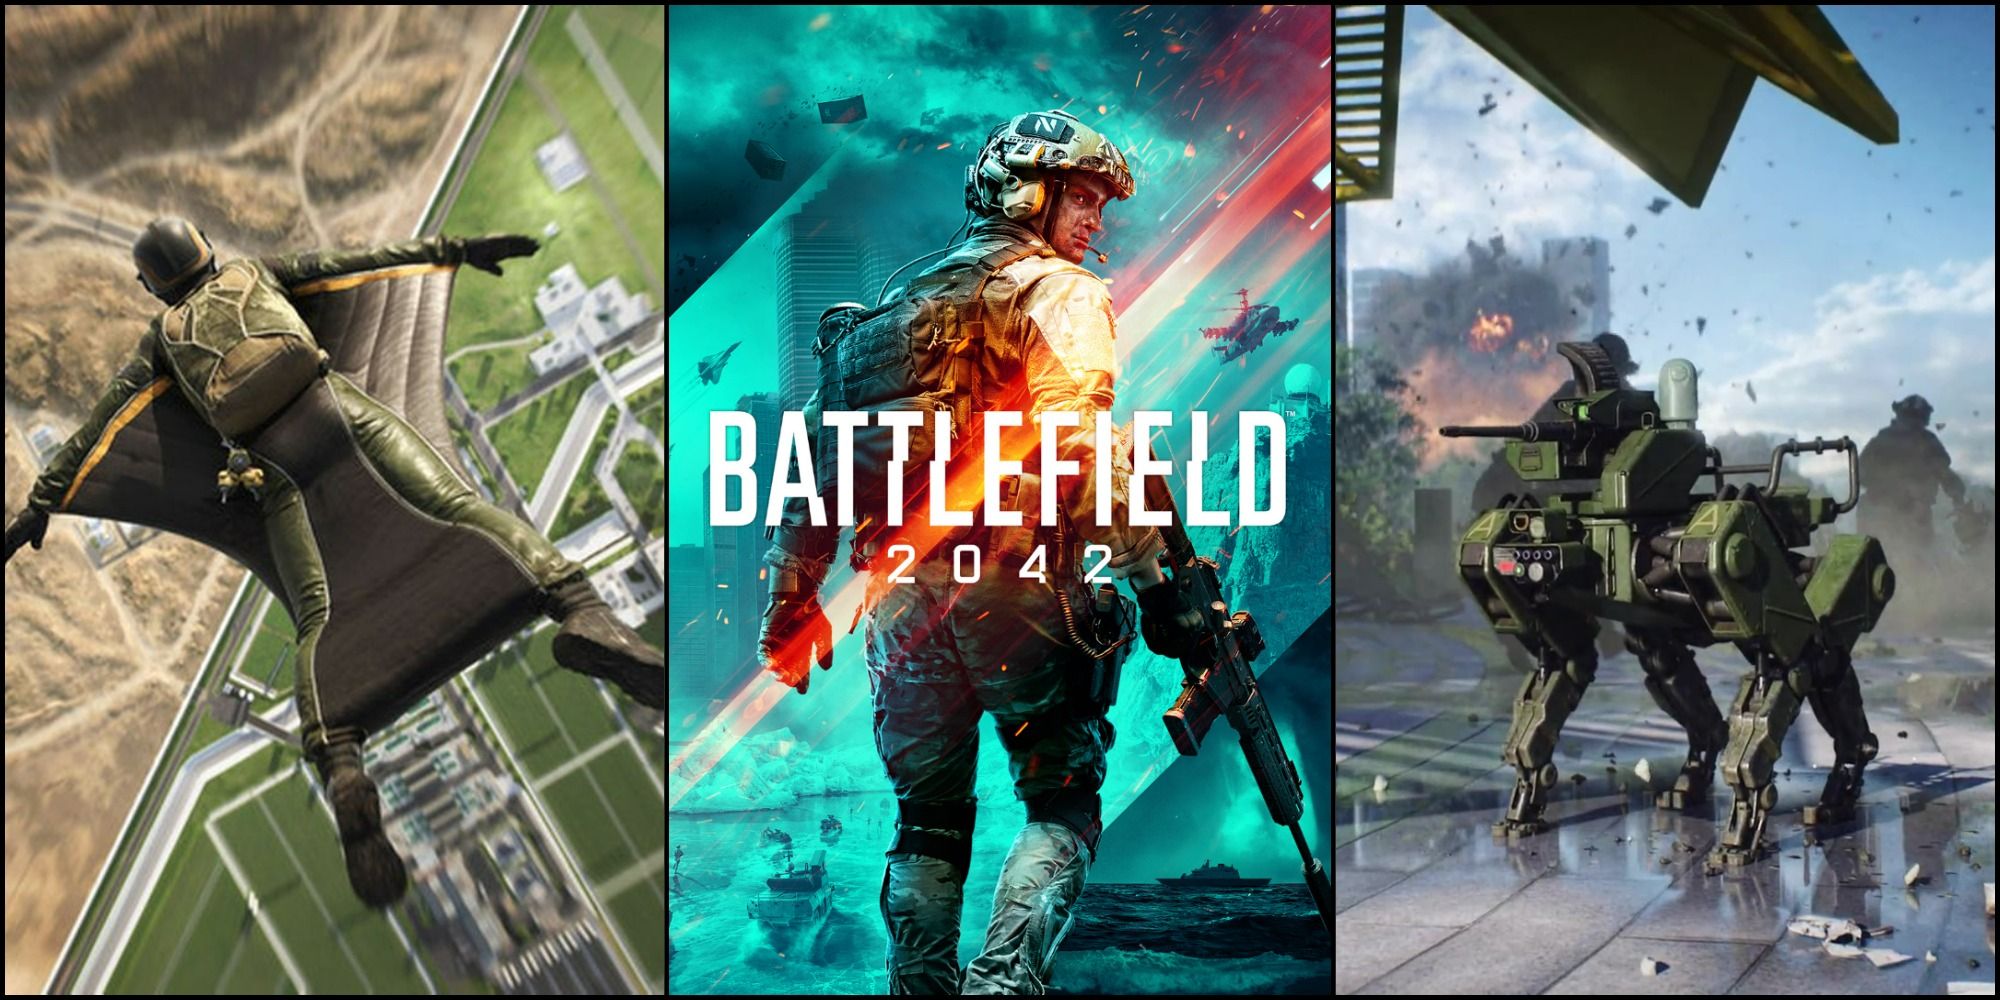 Battlefield 2042 soldier in the center, wingsuit on the left, robot dog on the right